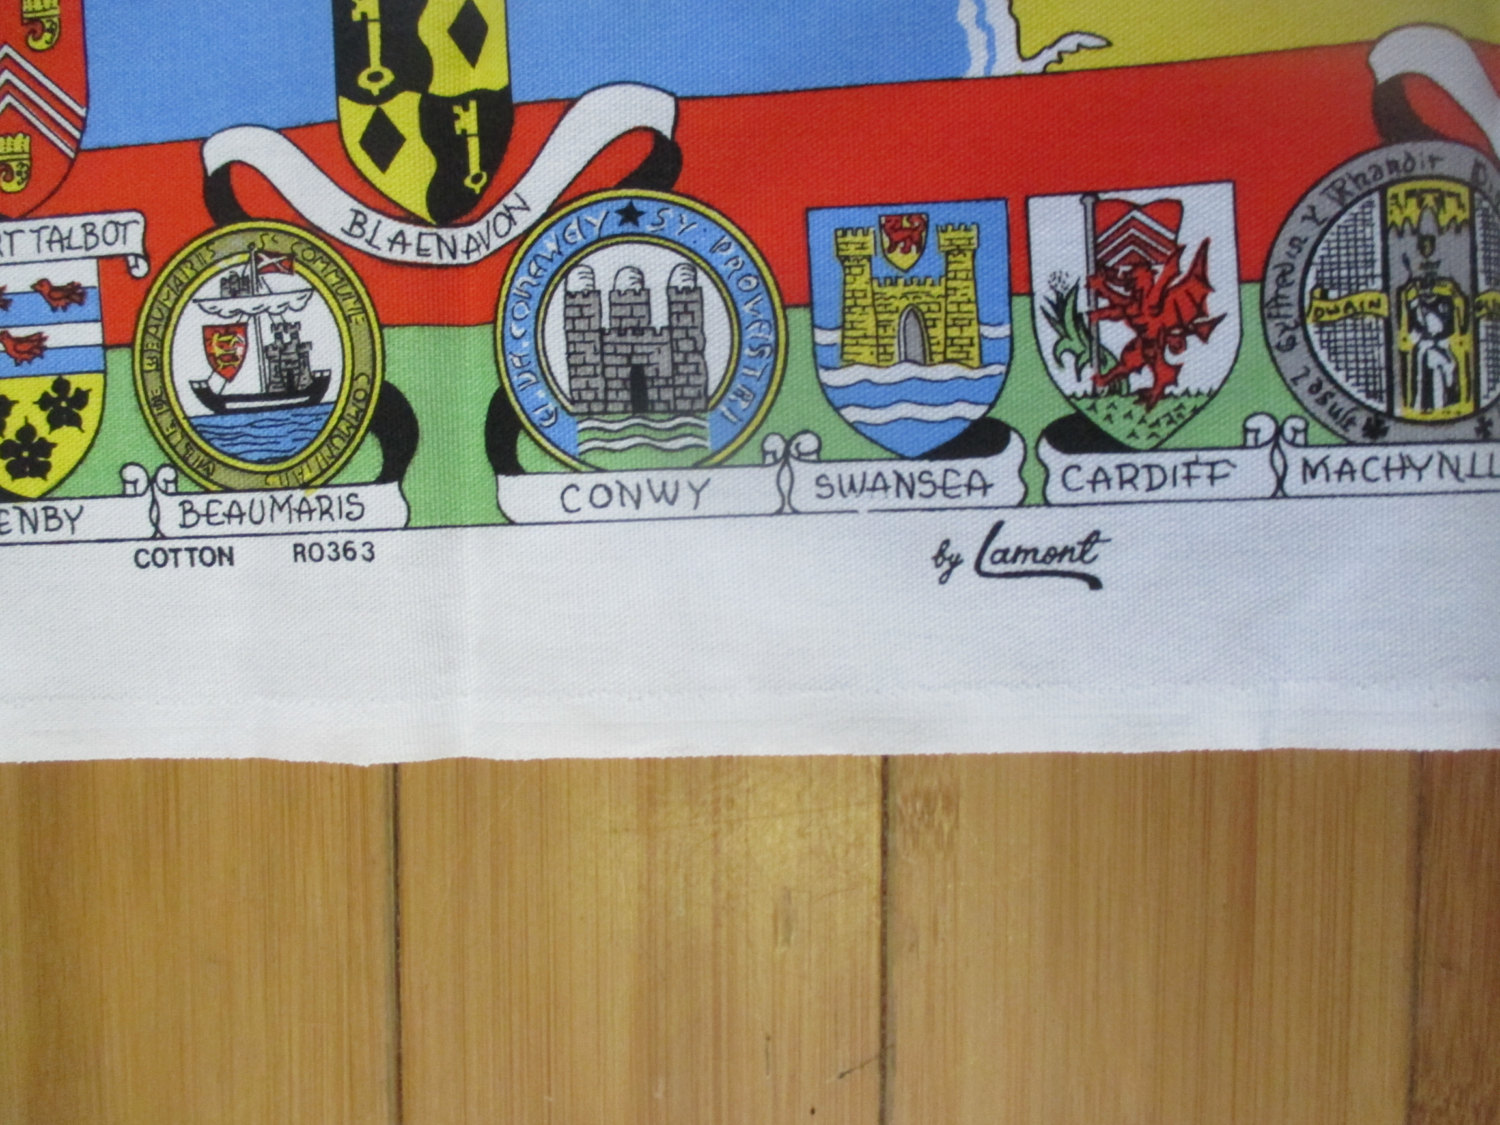 https://www.truevintageantiques.com/wp-content/uploads/2017/07/mid-century-colorful-kitchen-towel-new-old-stock-unused-100-cotton-vivid-colors-historical-wales-flags-country-bristol-channel-595be95c4.jpg